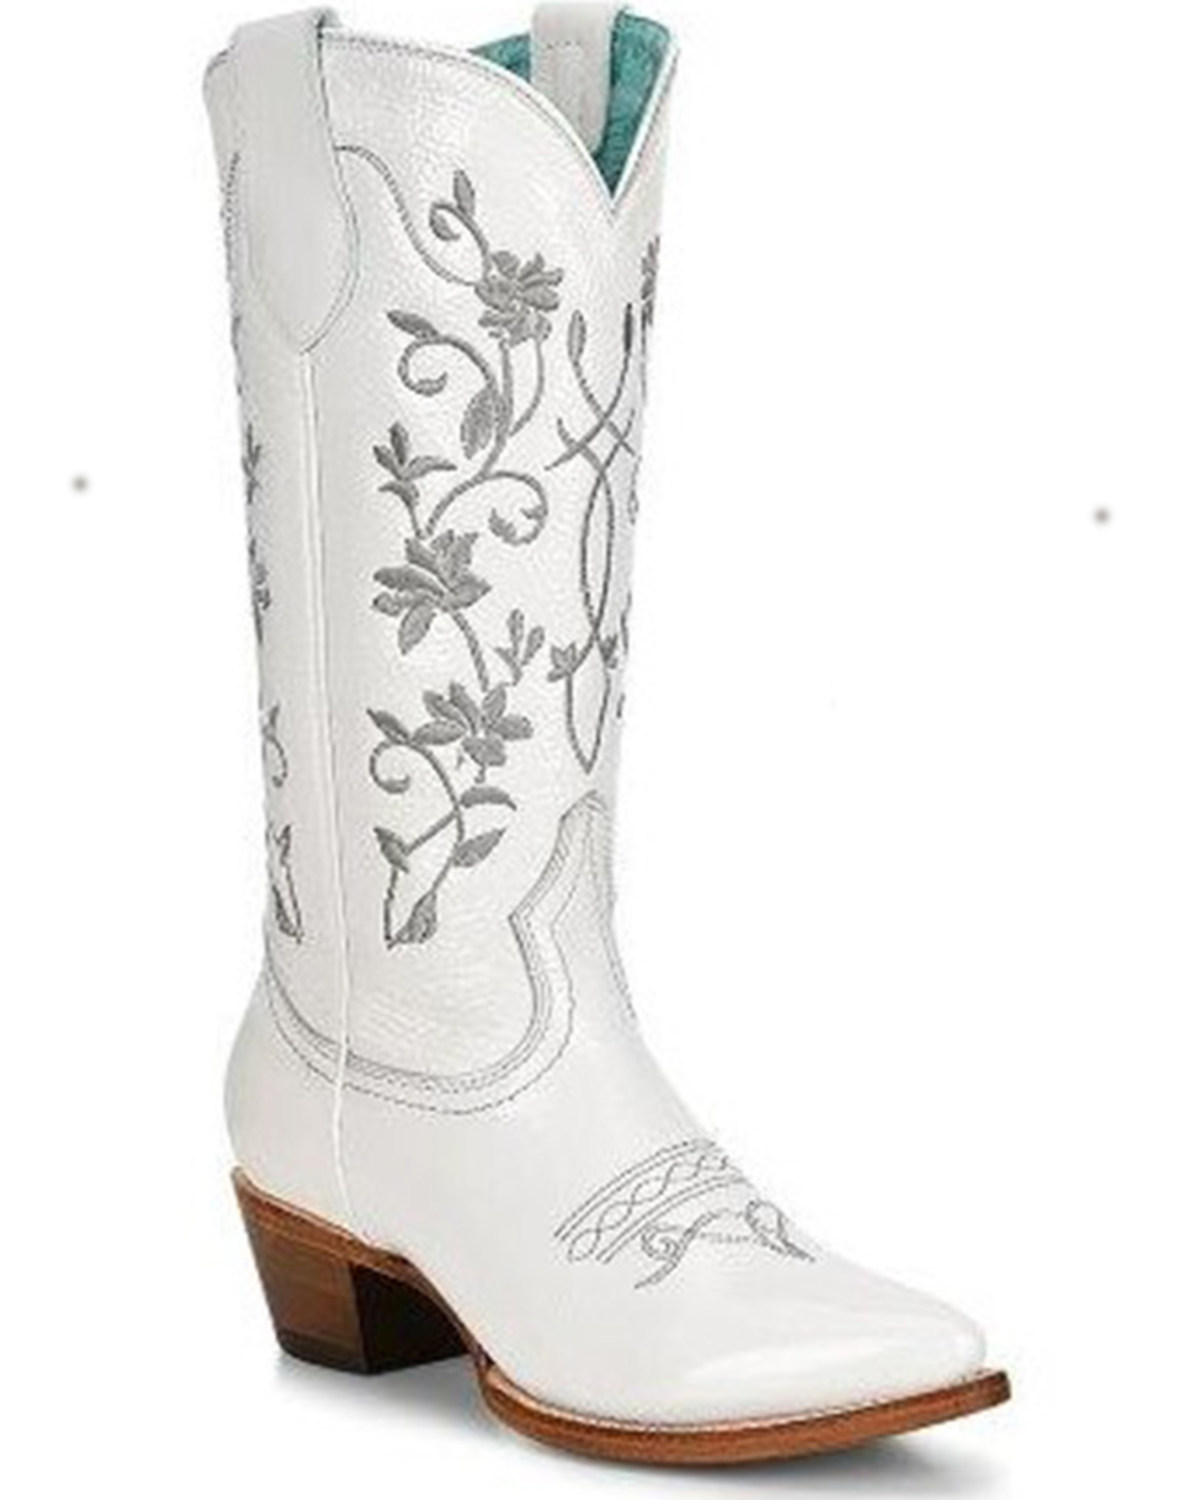 Corral Women's Floral Embroidered Patent Leather Western Boots - Pointed Toe